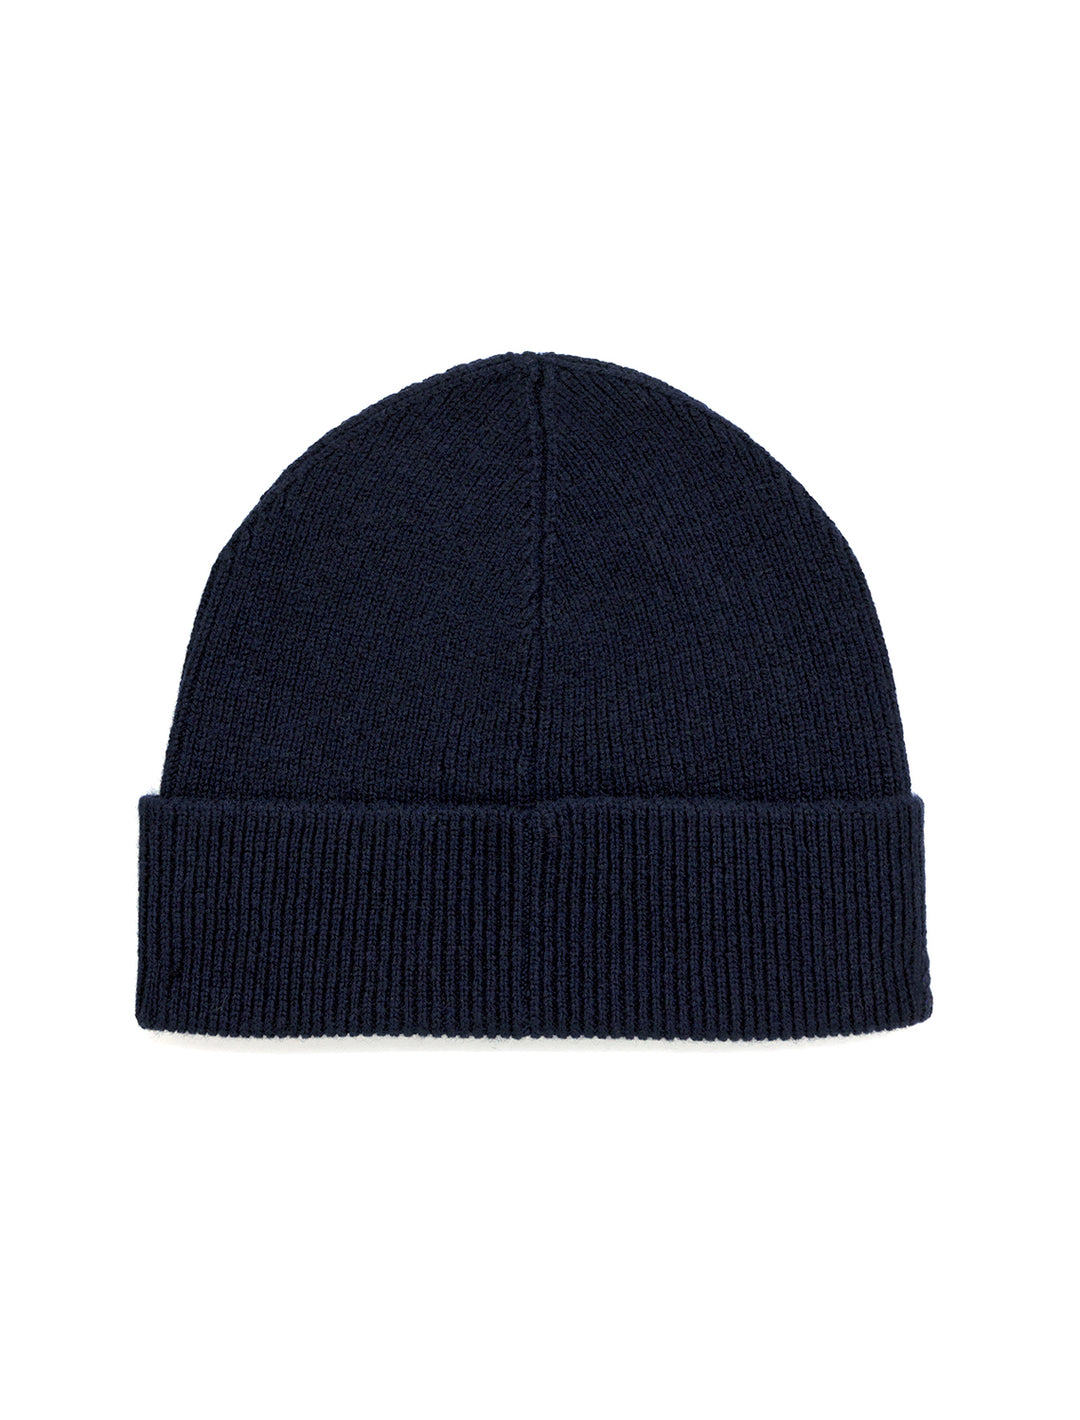 Front view of Jumper 1234's ribbed turnback hat in navy.